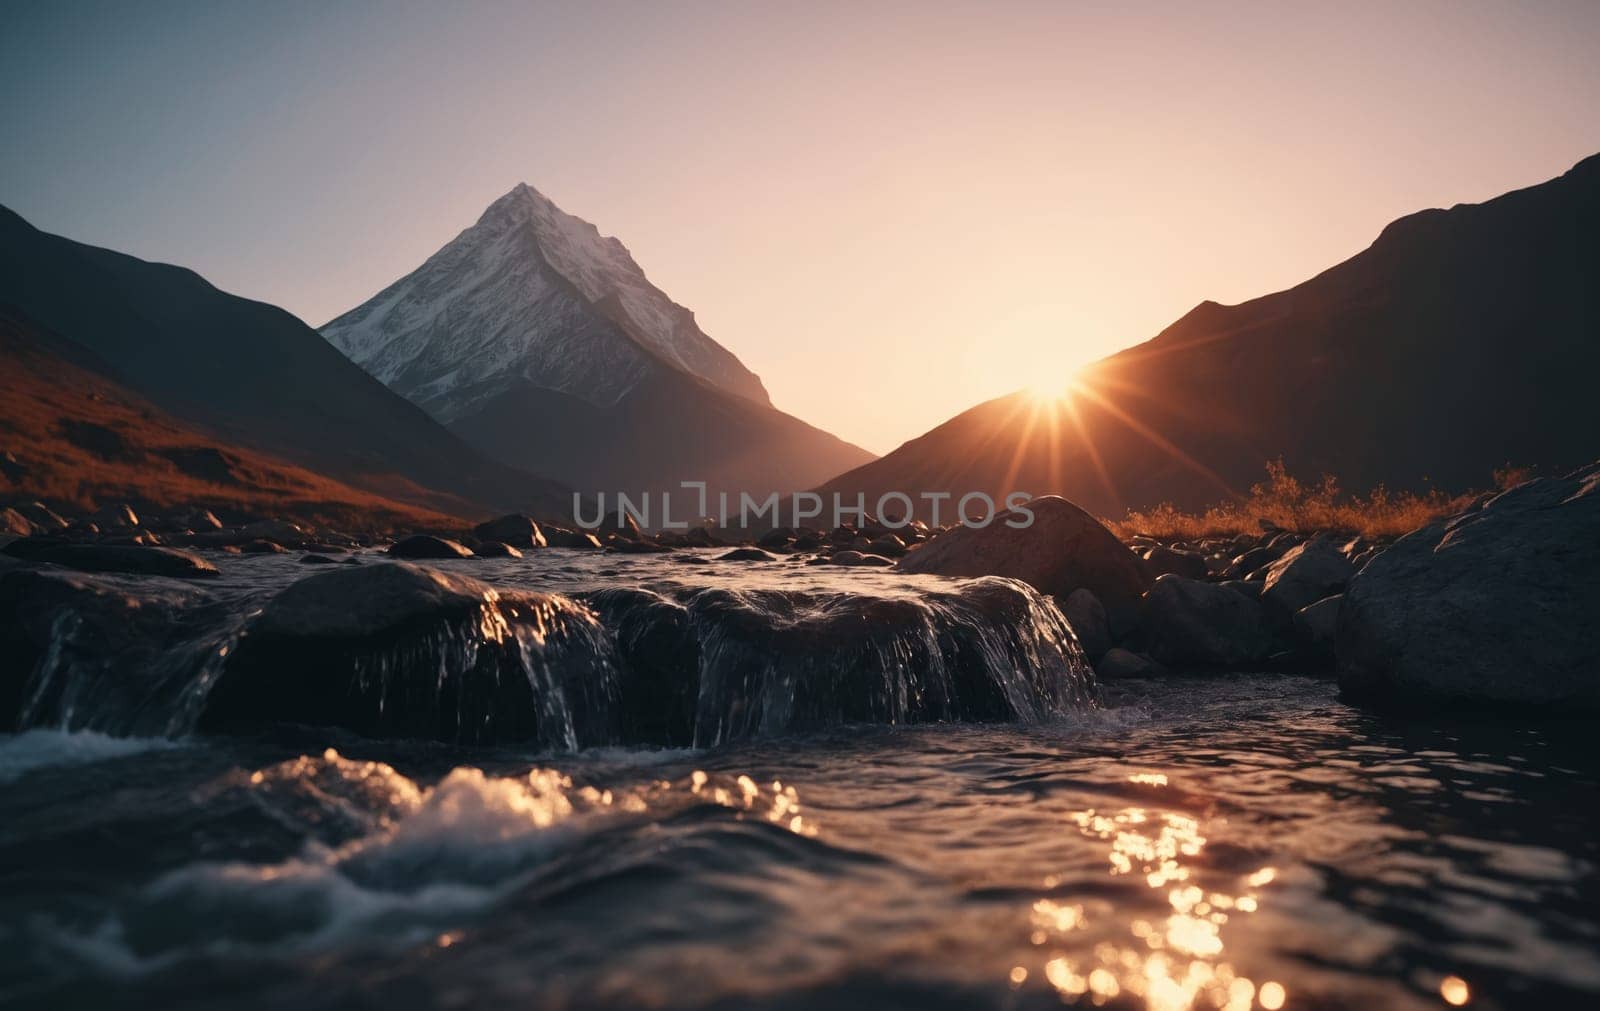 Mountain river at sunset, mountain peak in the background.